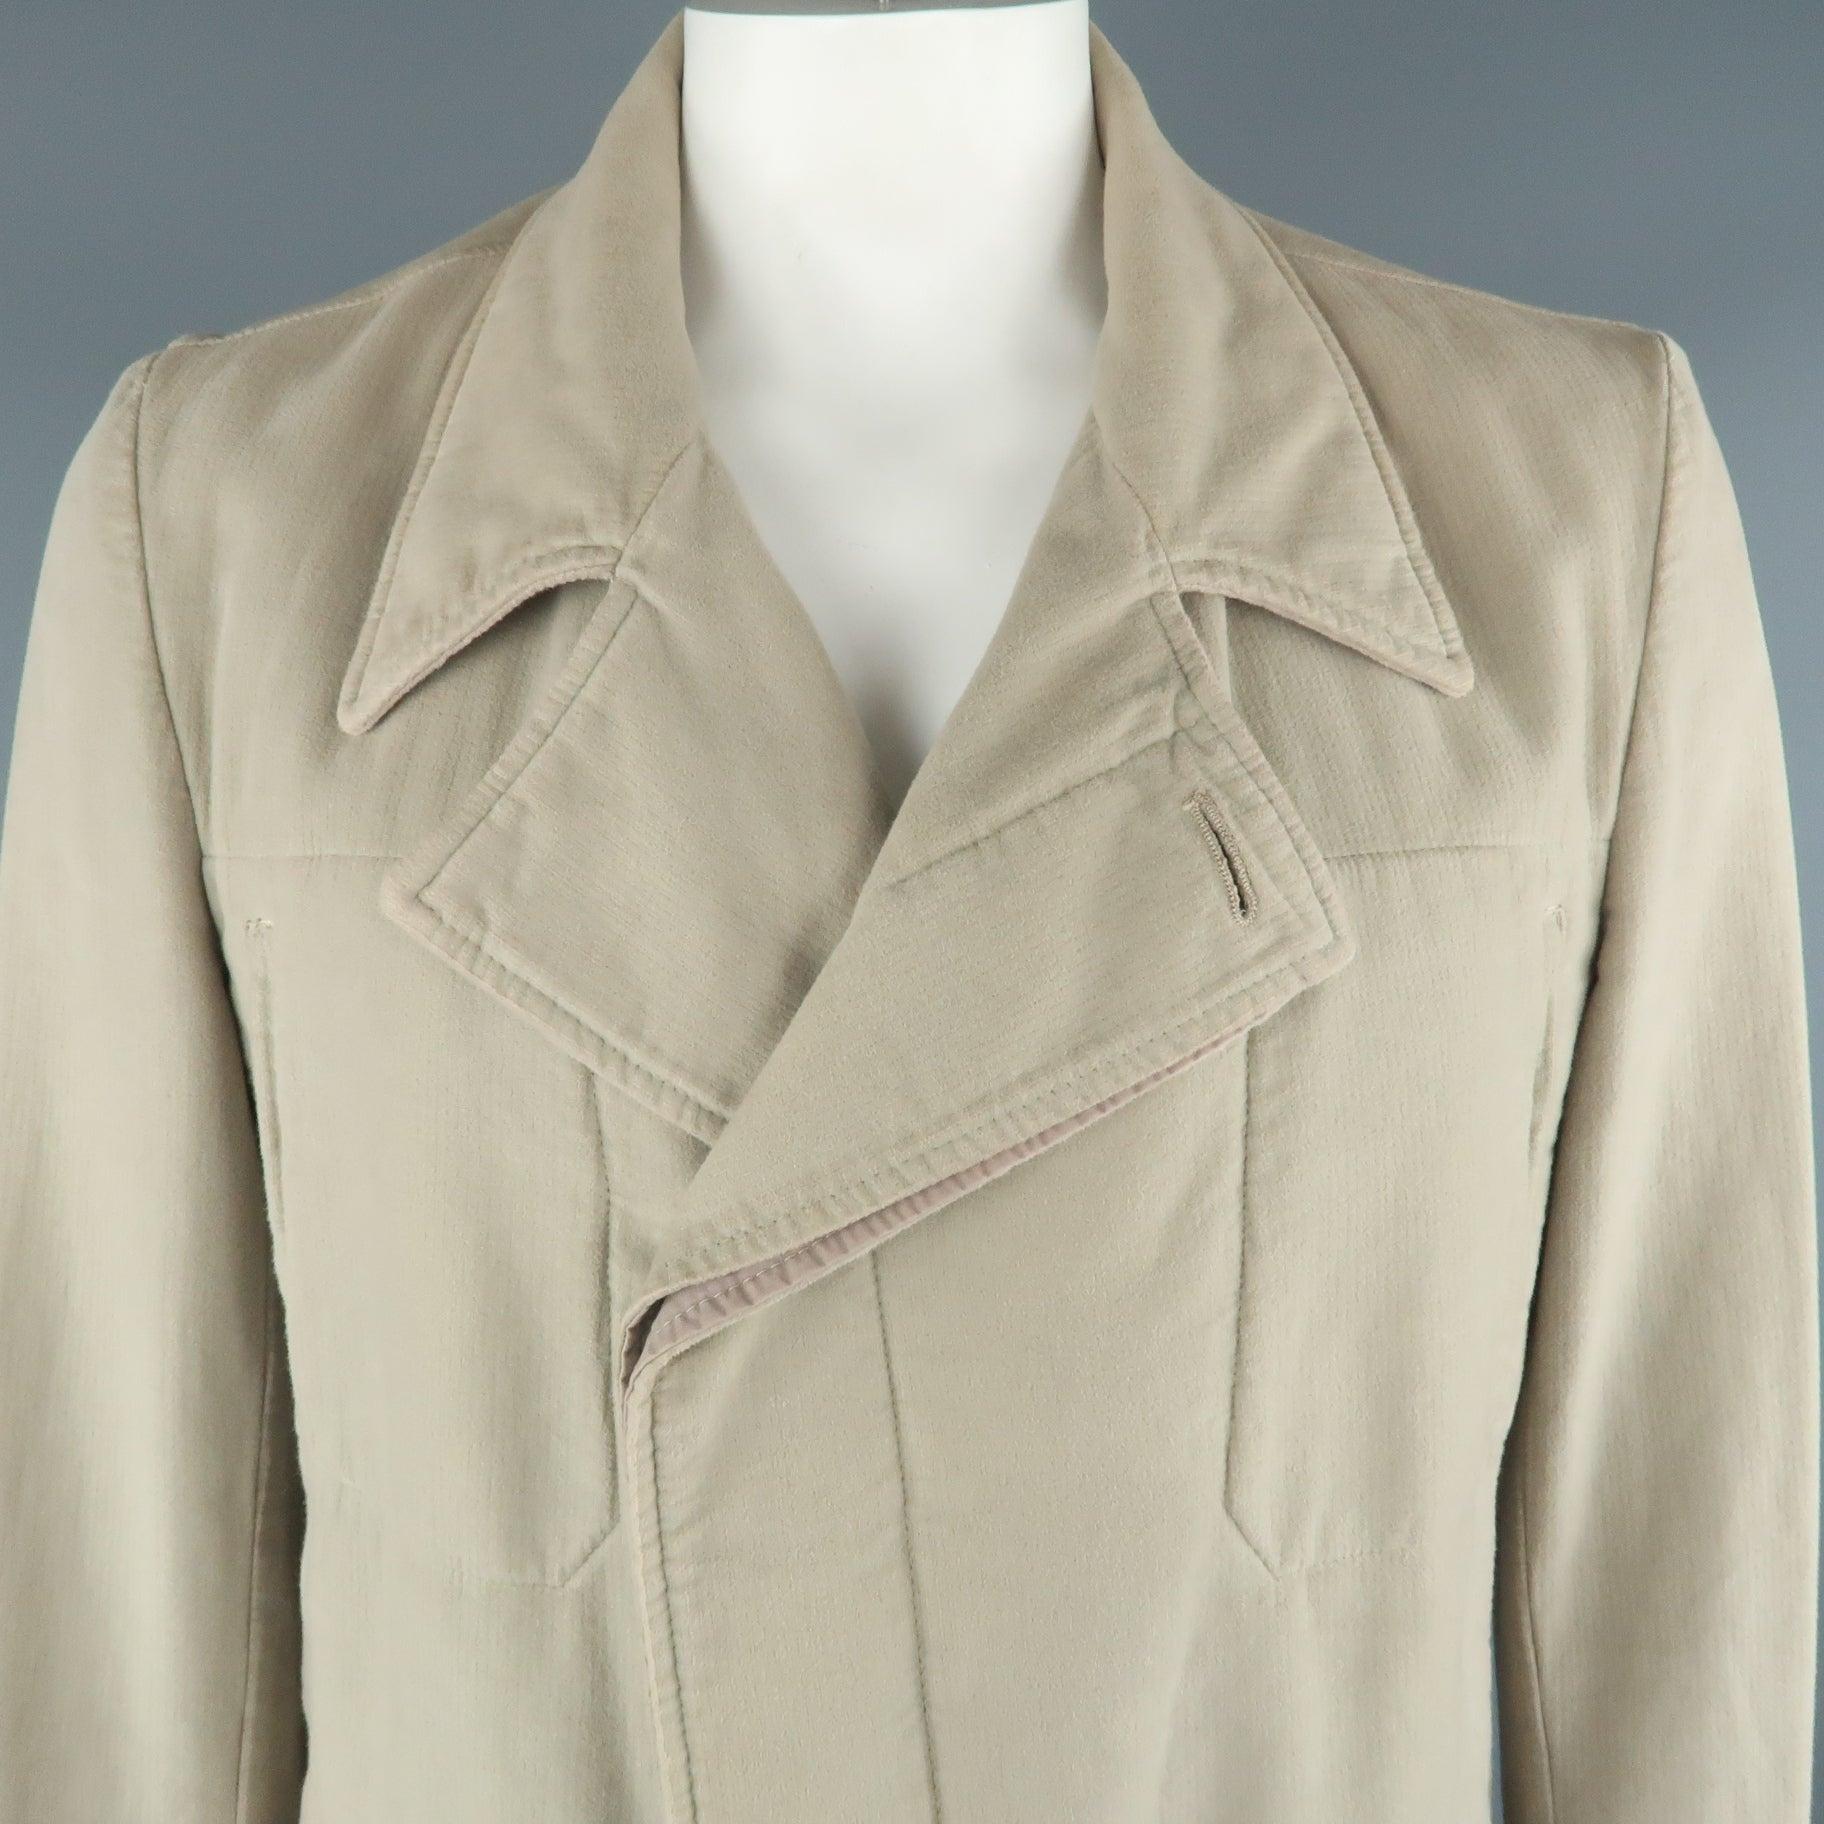 STEPHAN SCHNEIDER XL Khaki Cotton Hidden Buttons Peacoat In Good Condition For Sale In San Francisco, CA